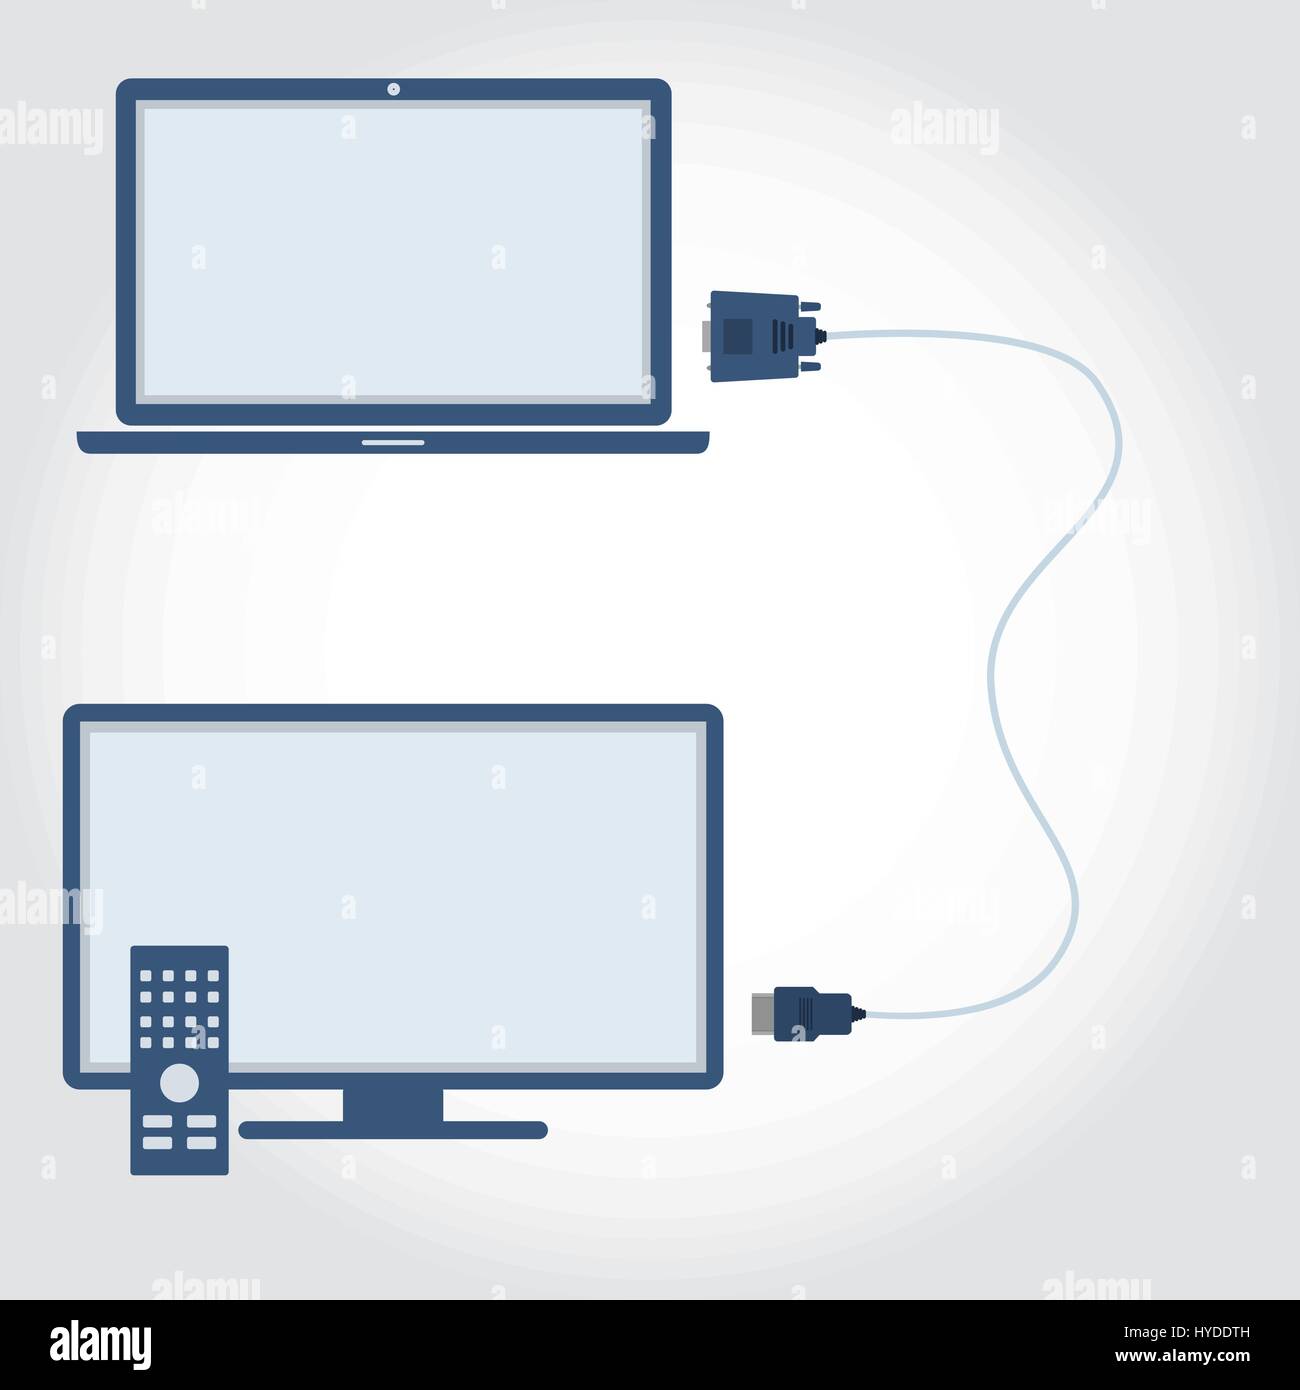 Laptop and television with VGA and HDMI interconnect. Flat design. Stock Vector